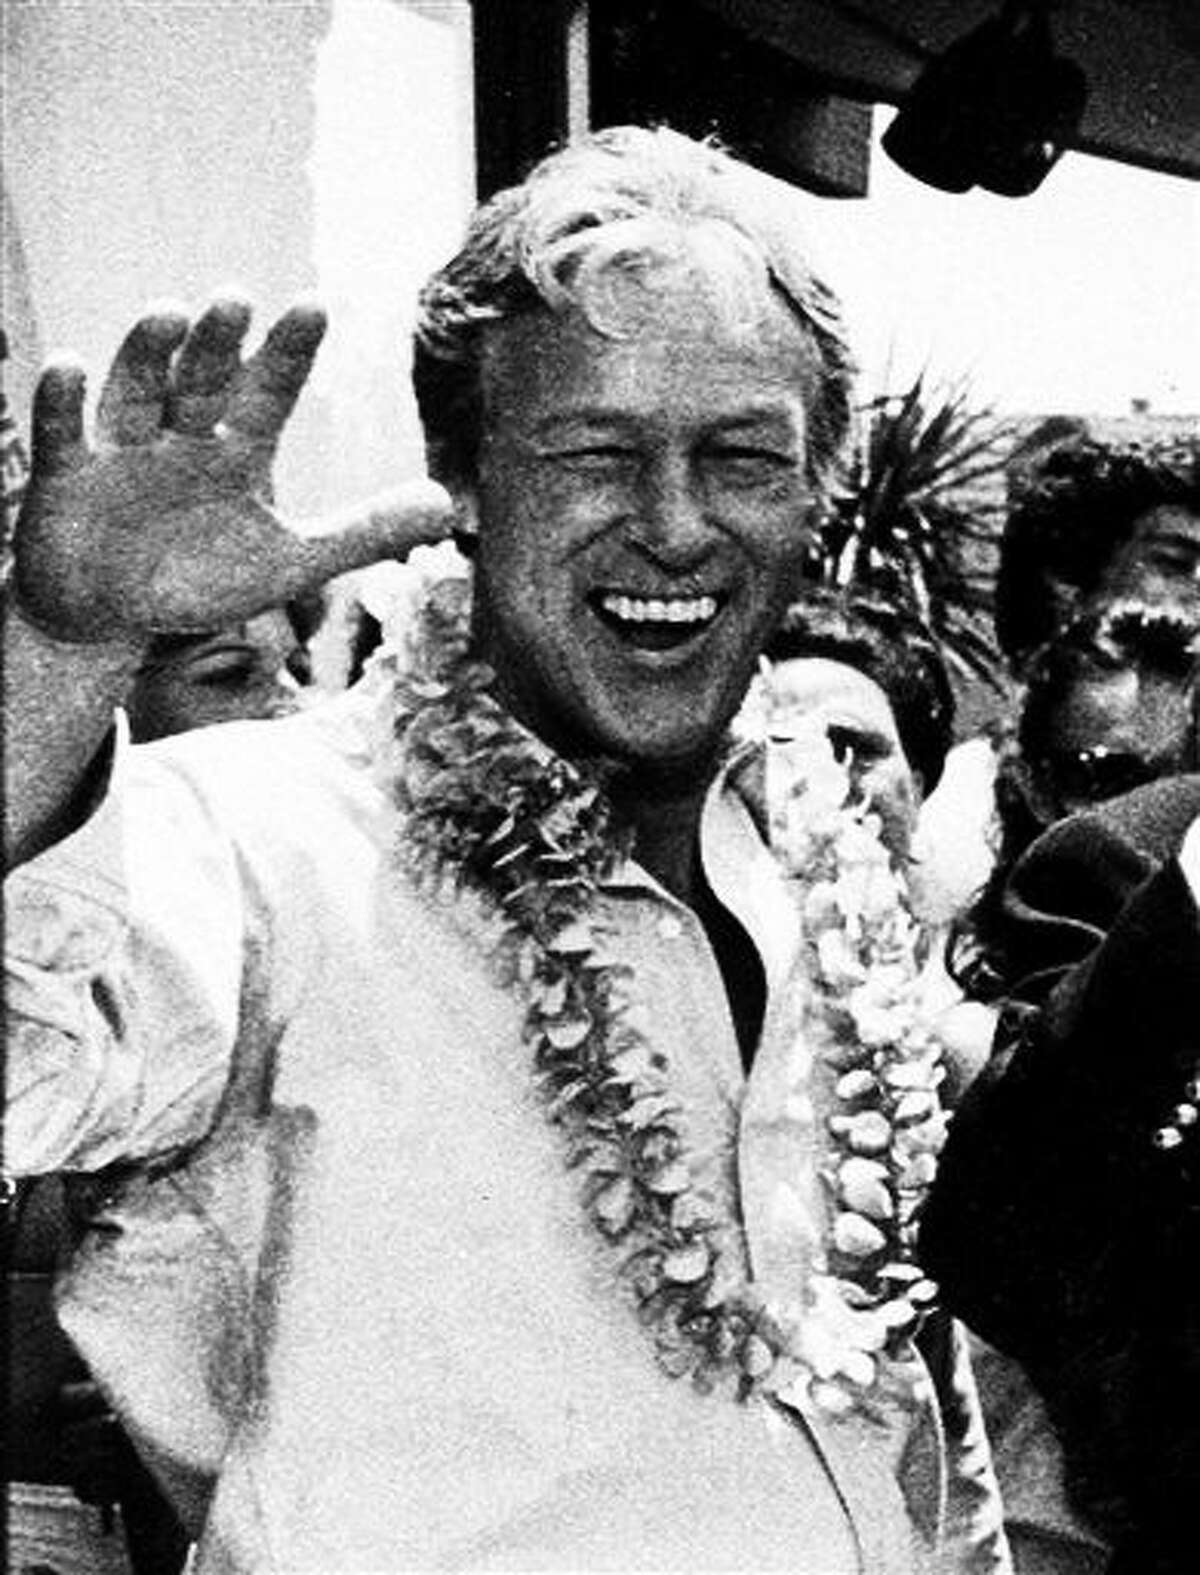 FILE - This Oct. 2, 1978 file photo shows Russell Johnson, as the professor, posing during filming of a two-hour reunion show, "The Return from Gilligan's Island," in Los Angeles. Johnson died Thursday, Jan. 16, 2014, at his home in Washington State of natural causes. He was 89. (AP Photo/Wally Fong, File)